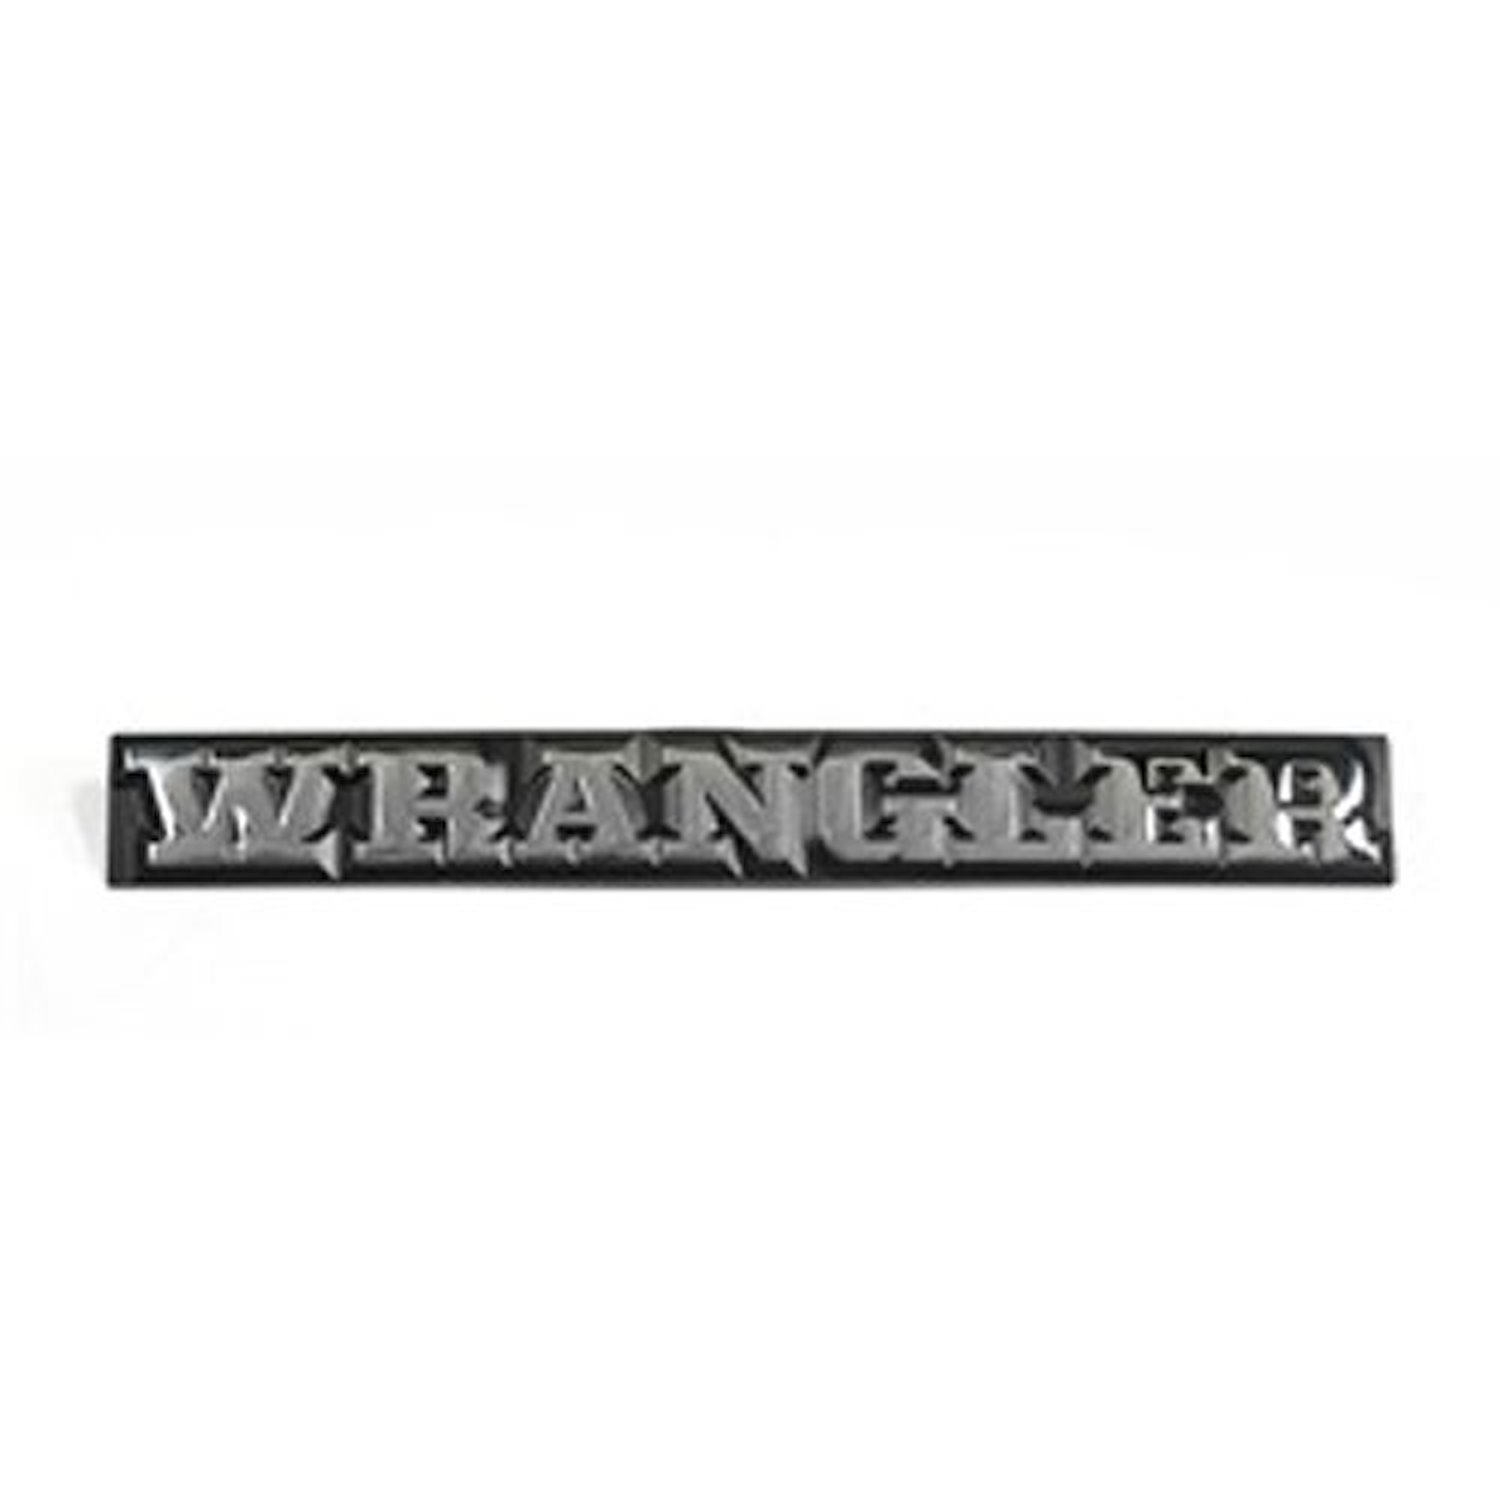 Black andChrome replacement WRANGLER emblem from Omix-ADA, Fits 87-90 Jeep Wrangler Used on rear quarter panels.